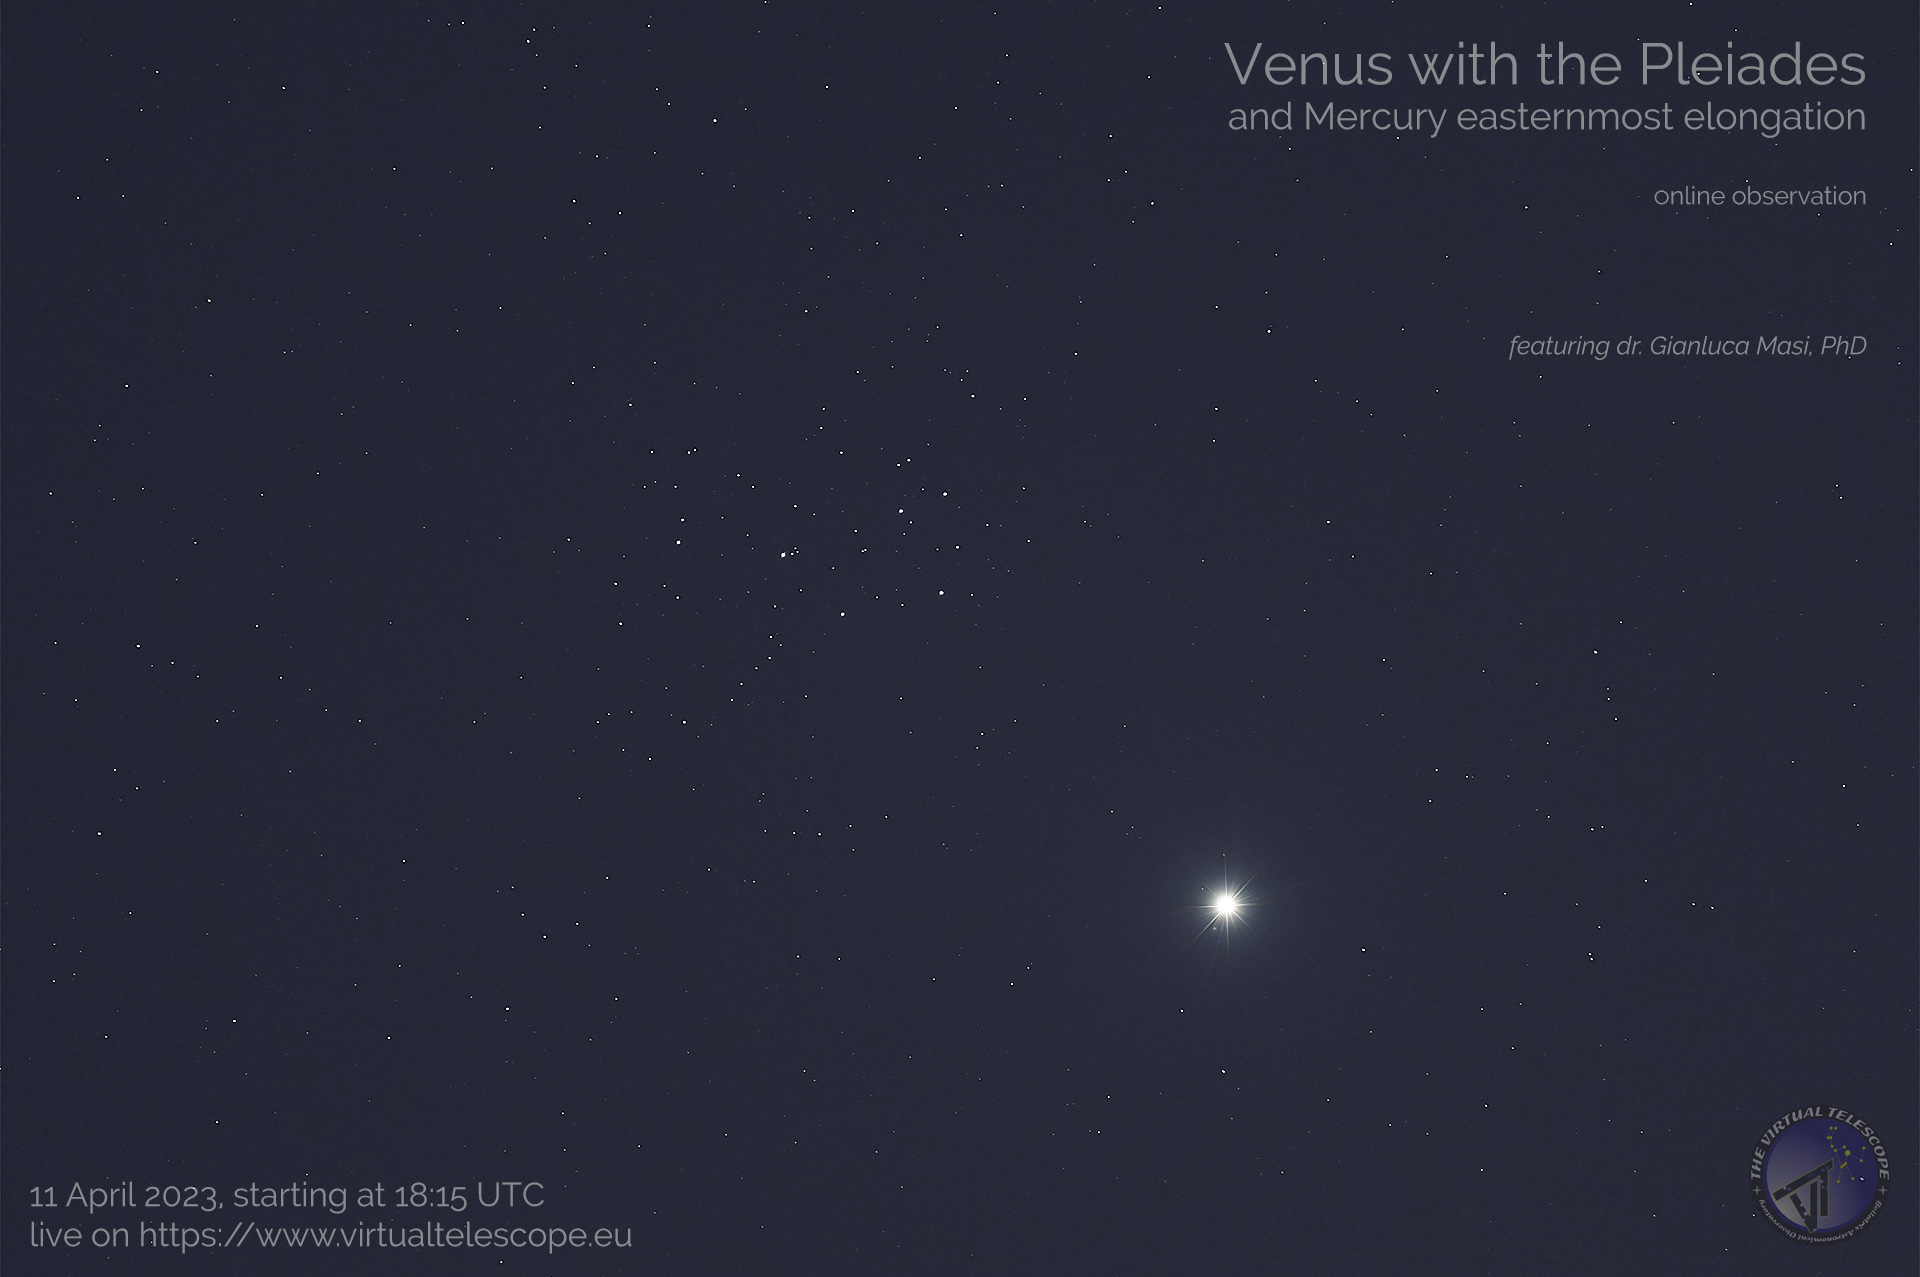 Venus with the Pleiades, Mercury easternmost elongation: online observation  - 11 Apr. 2023 - The Virtual Telescope Project 2.0